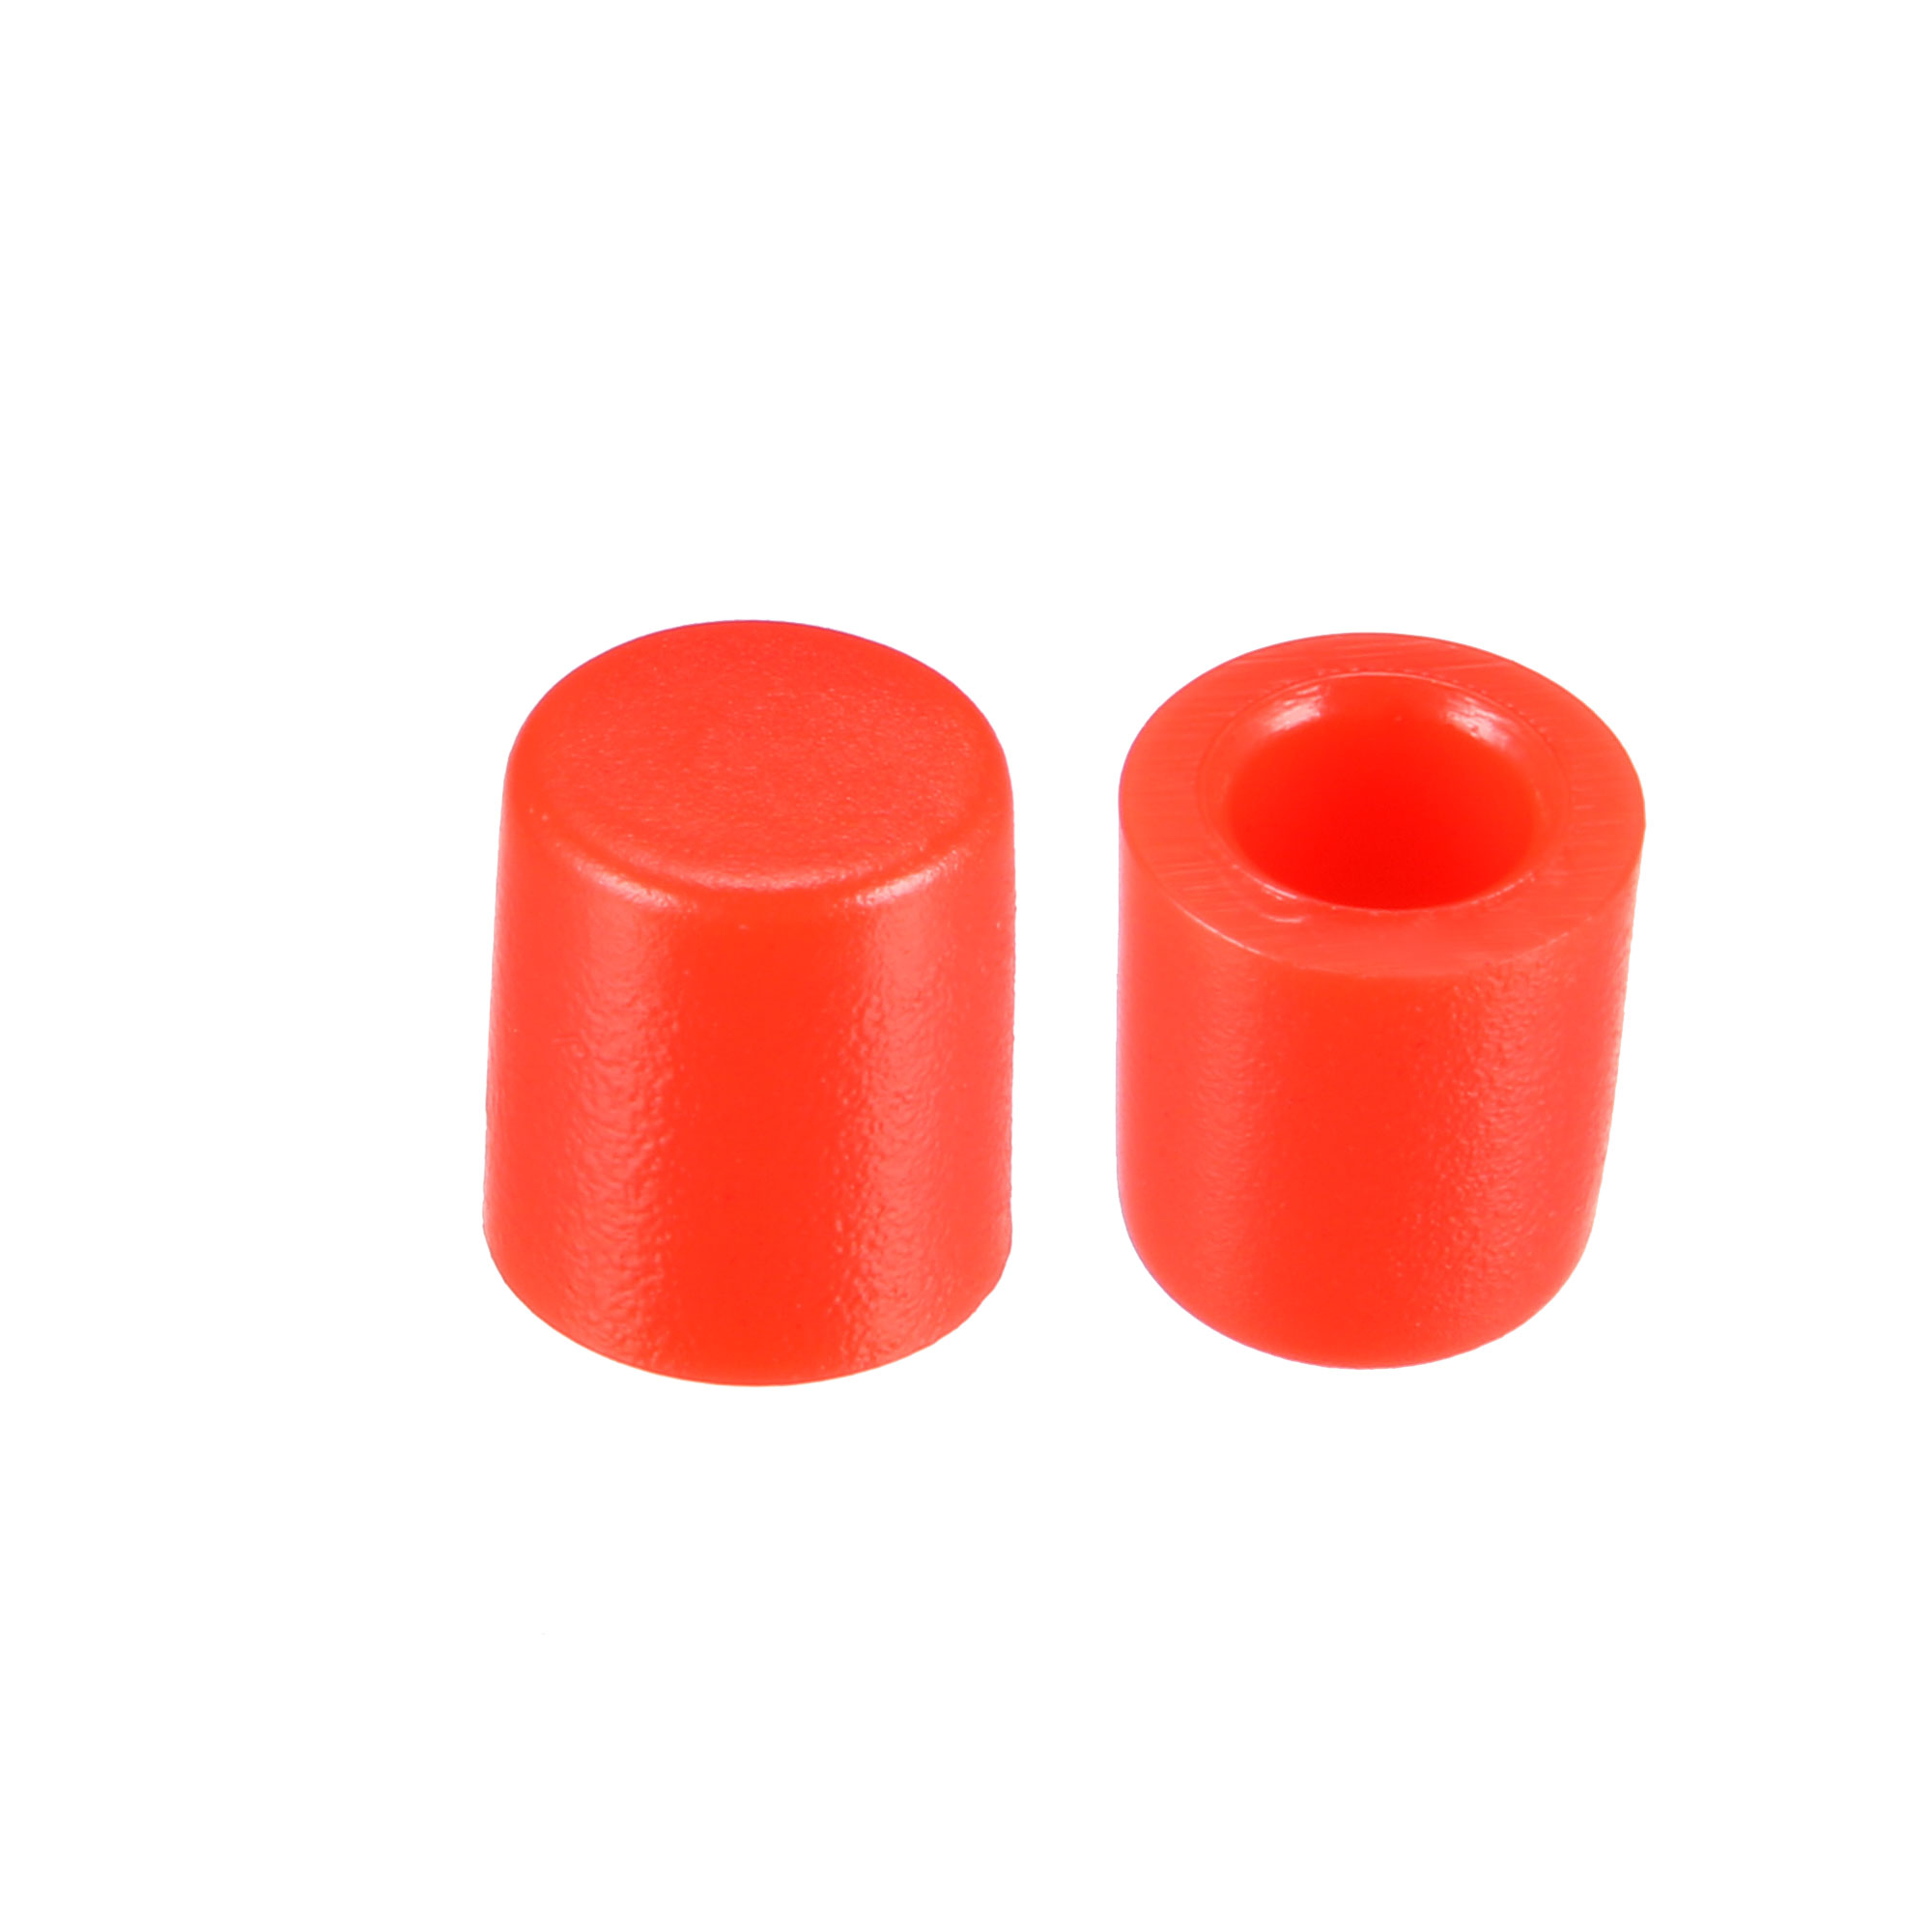 uxcell 20Pcs Plastic Pushbutton Tactile Switch Caps Cover Keycaps Red for 6x6x7.3mm Tact Switch 